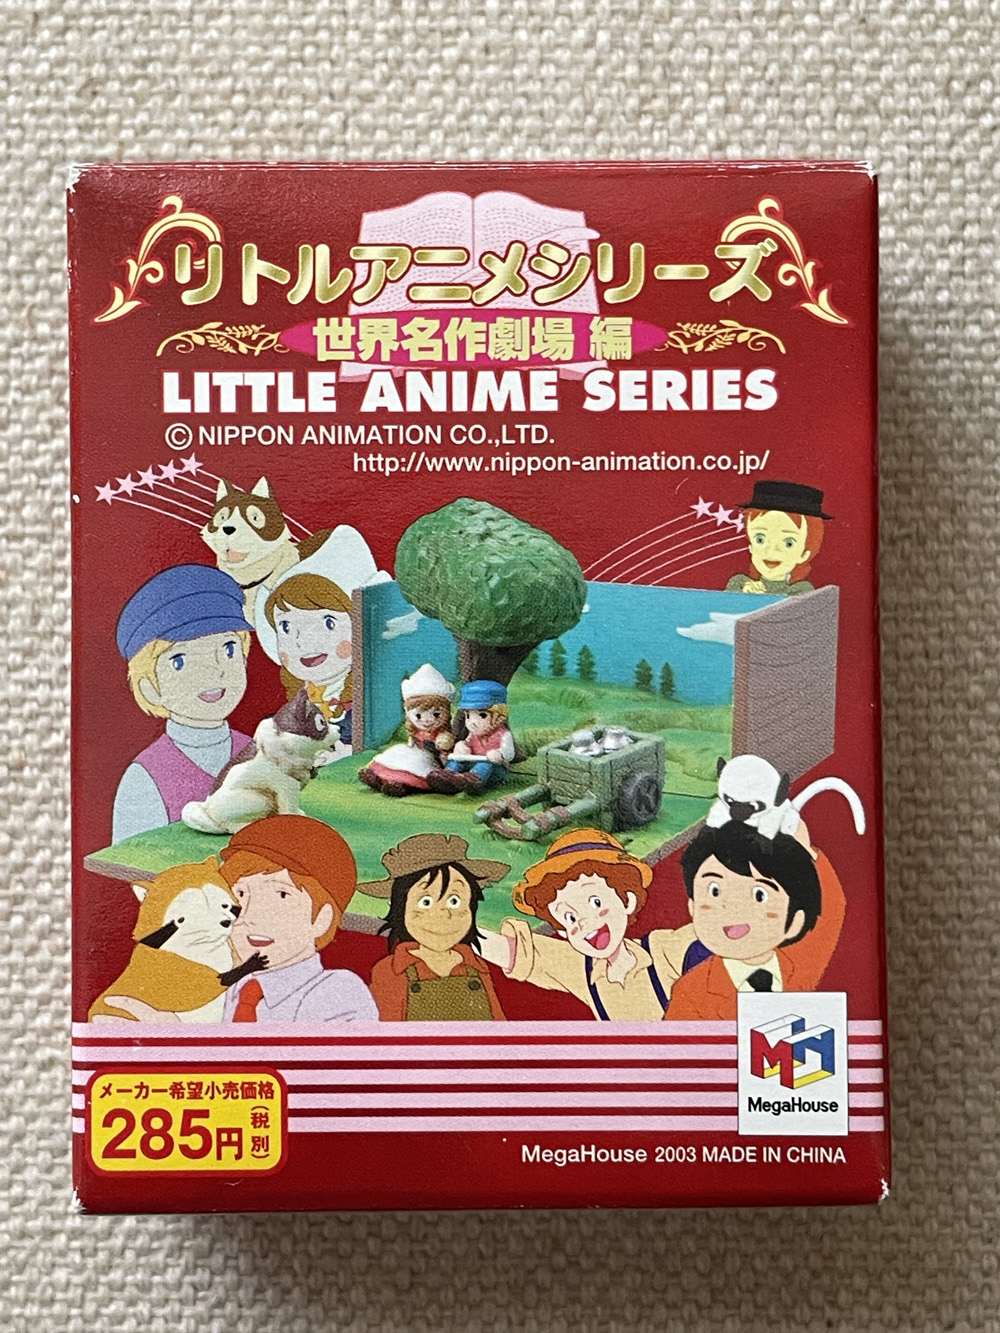 Blind Box containing a Little Anime Series World Masterpiece Theater miniature diorama featuring Anne of Green Gables, 3000 Leagues in Search of Mother, Rascal the Raccoon, A Dog of Flanders, or The Adventures of Tom Sawyer.